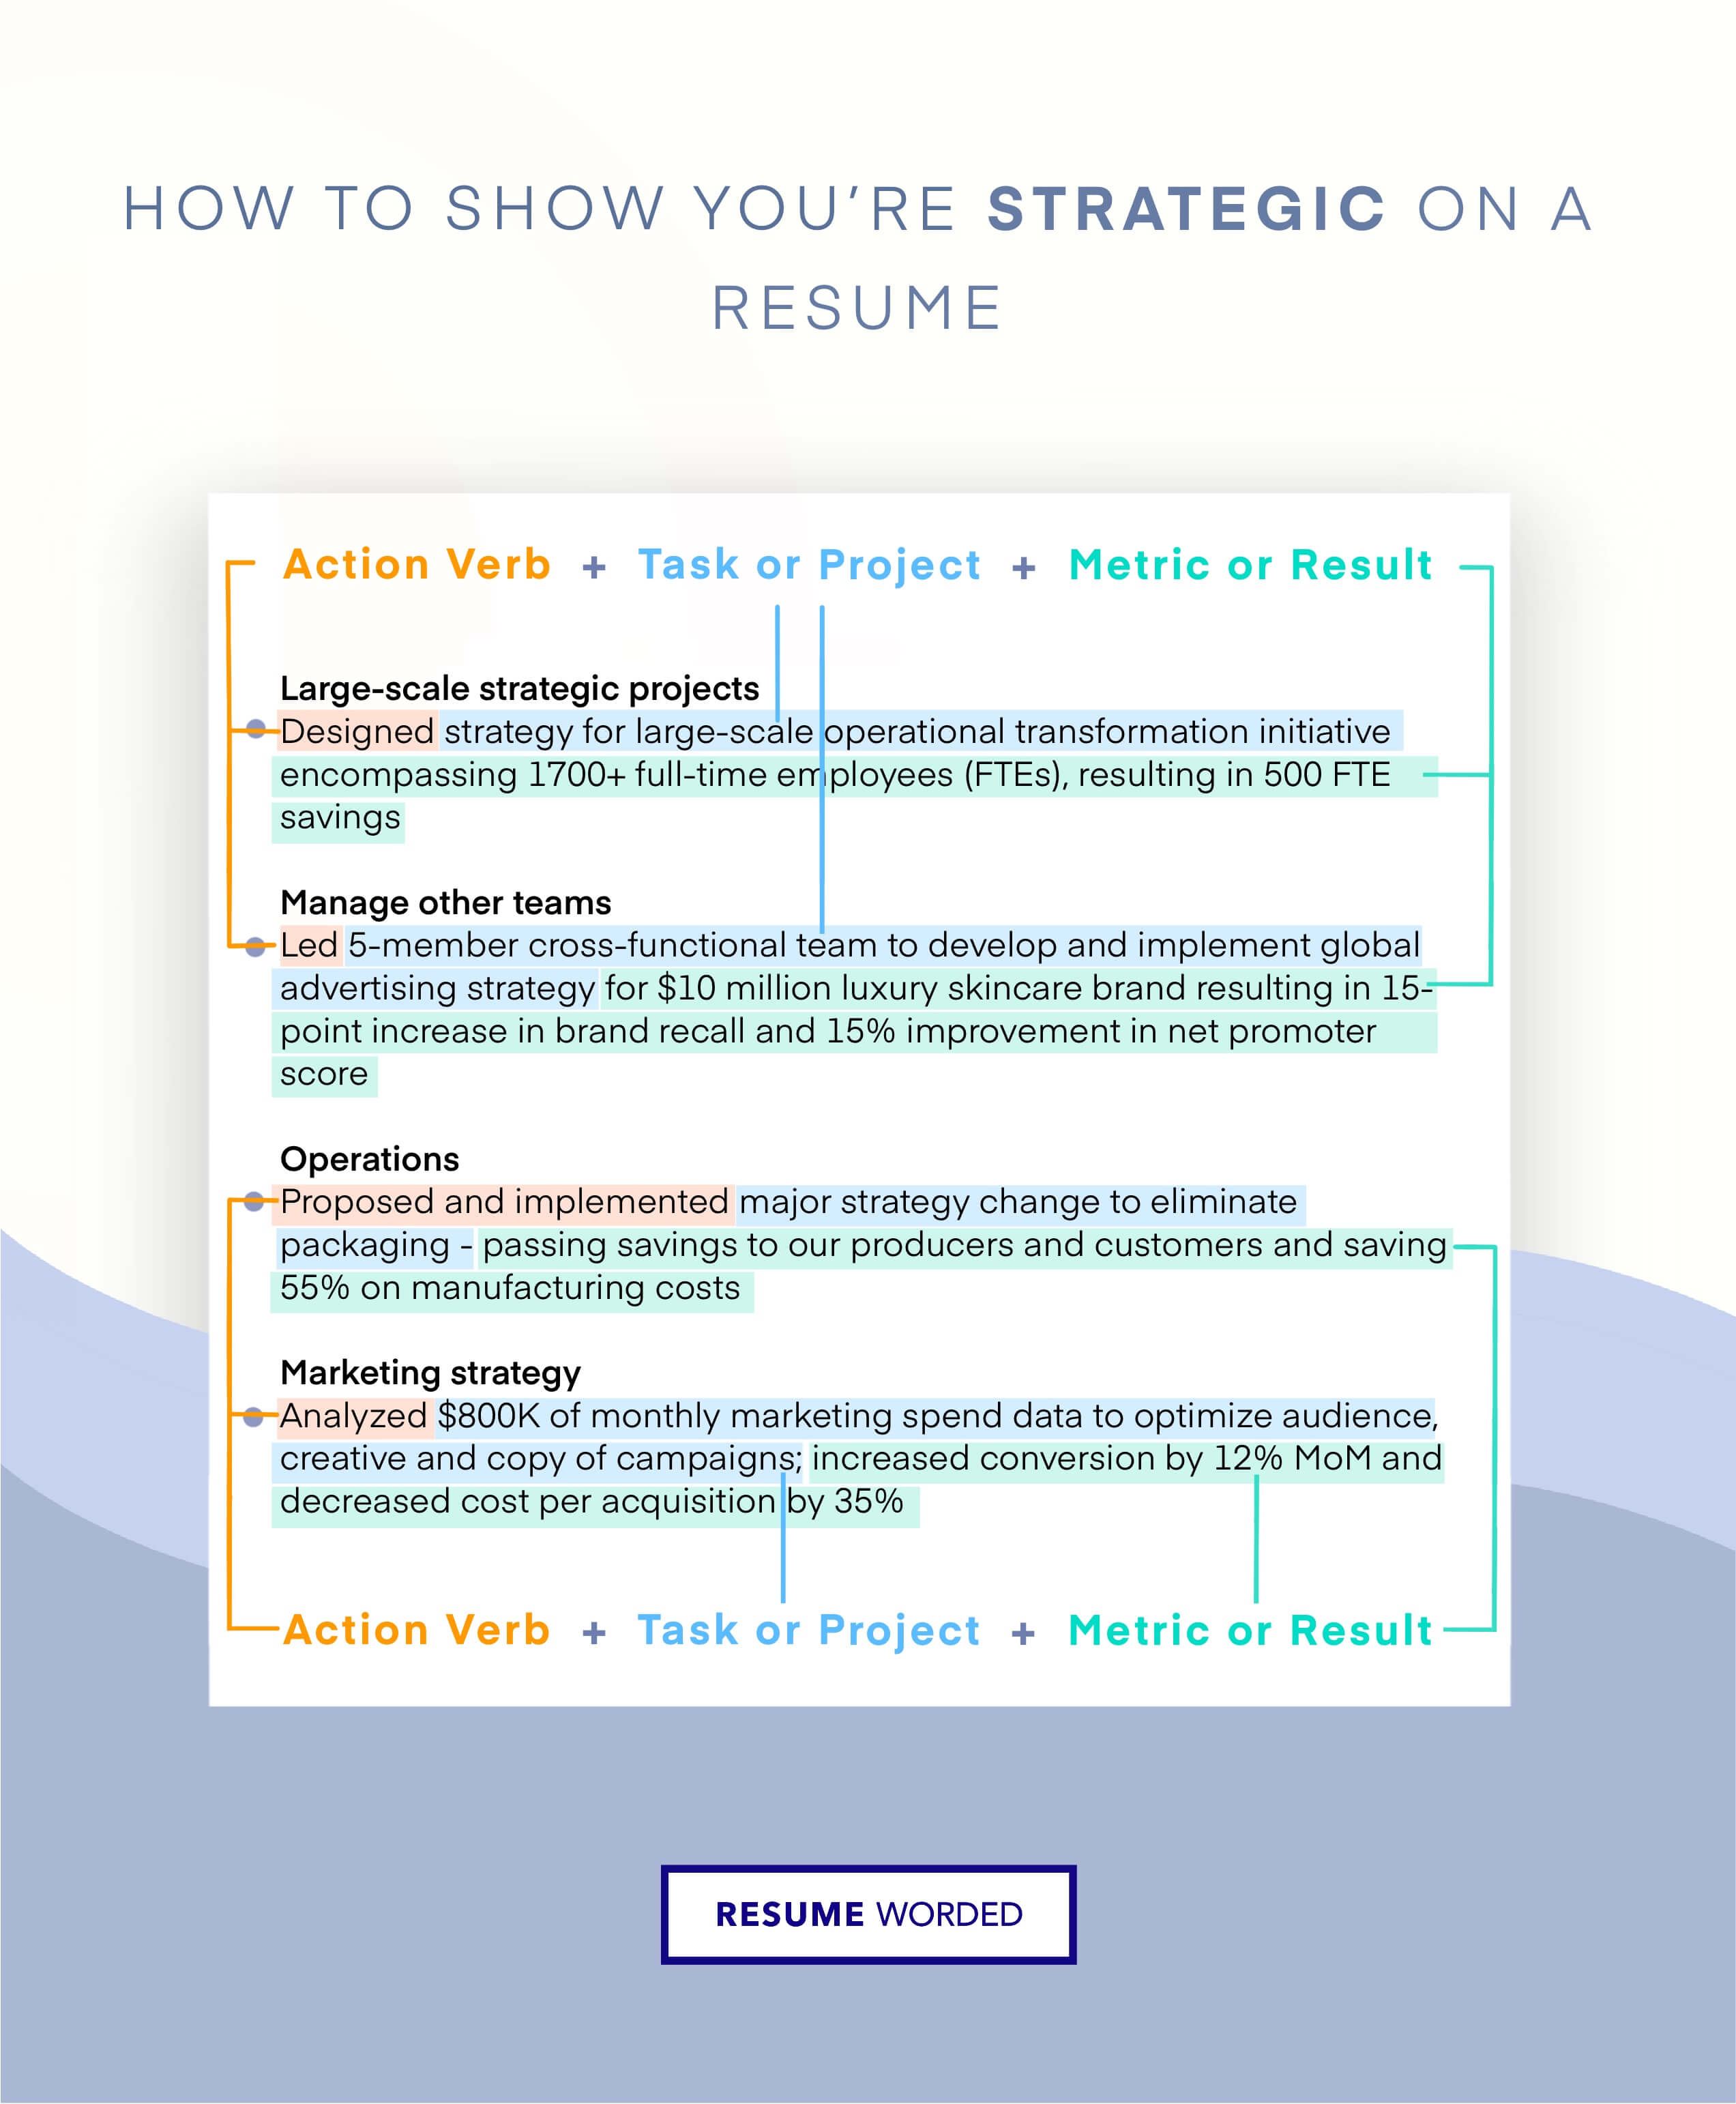 Highlight your strategic planning skills - Key Account Manager Resume